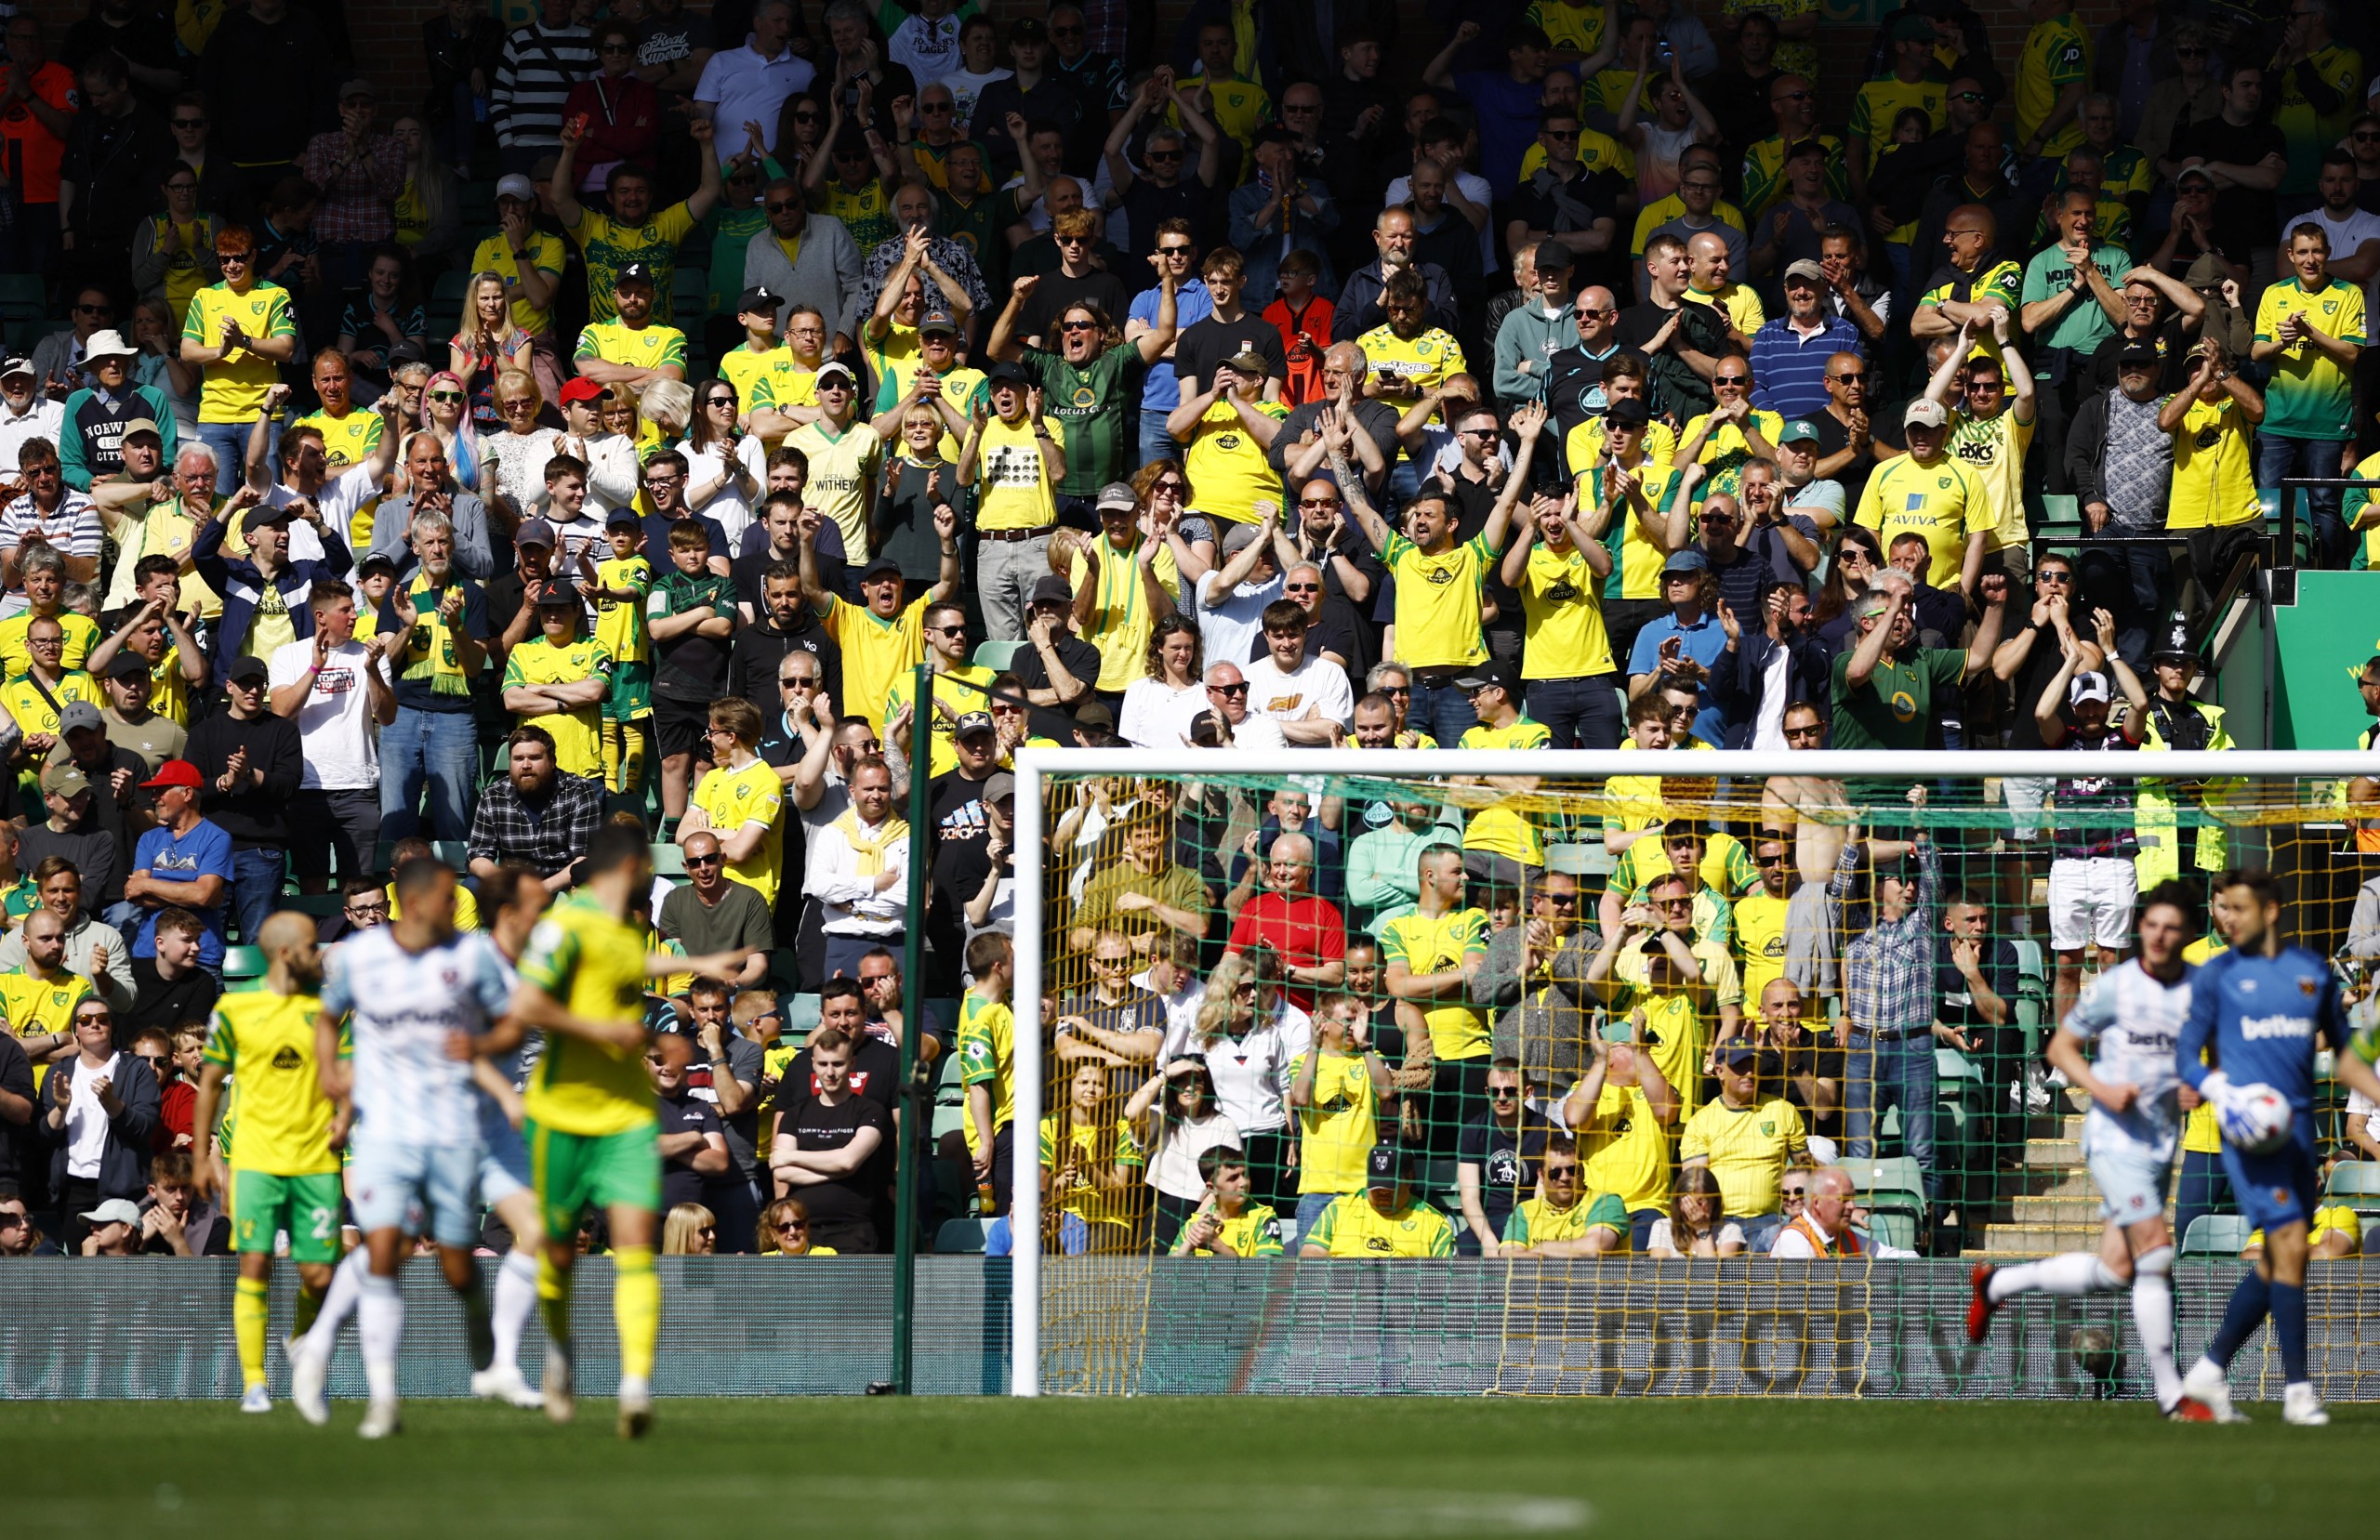 Soccer Football - Premier League - Norwich City v West Ham United - Carrow Road, Norwich, Britain - May 8, 2022 Norwich City fans in the stands Action Images via Reuters/Andrew Boyers EDITORIAL USE ONLY. No use with unauthorized audio, video, data, fixture lists, club/league logos or 'live' services. Online in-match use limited to 75 images, no video emulation. No use in betting, games or single club /league/player publications.  Please contact your account representative for further details.